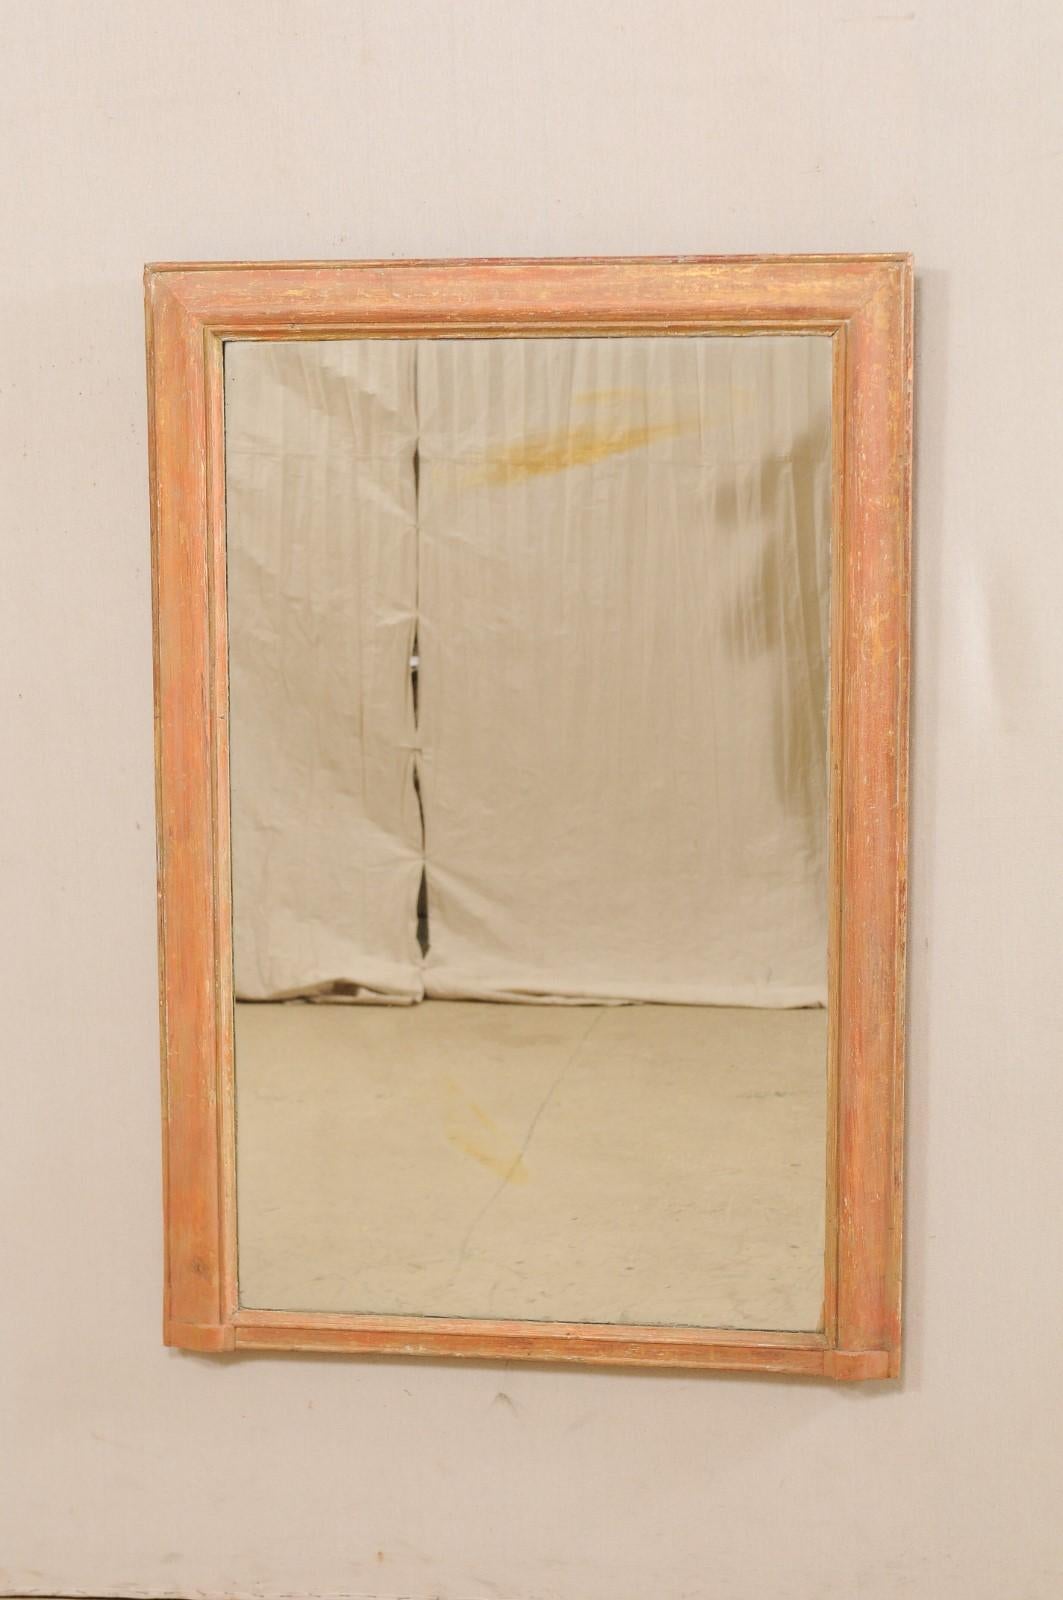 A French painted wood mirror from the 19th century. This antique mirror from France features clean, simple lines about the painted wood frame, with inner mirror being original. The primary coloring in this piece is a lovely salmon color, with an